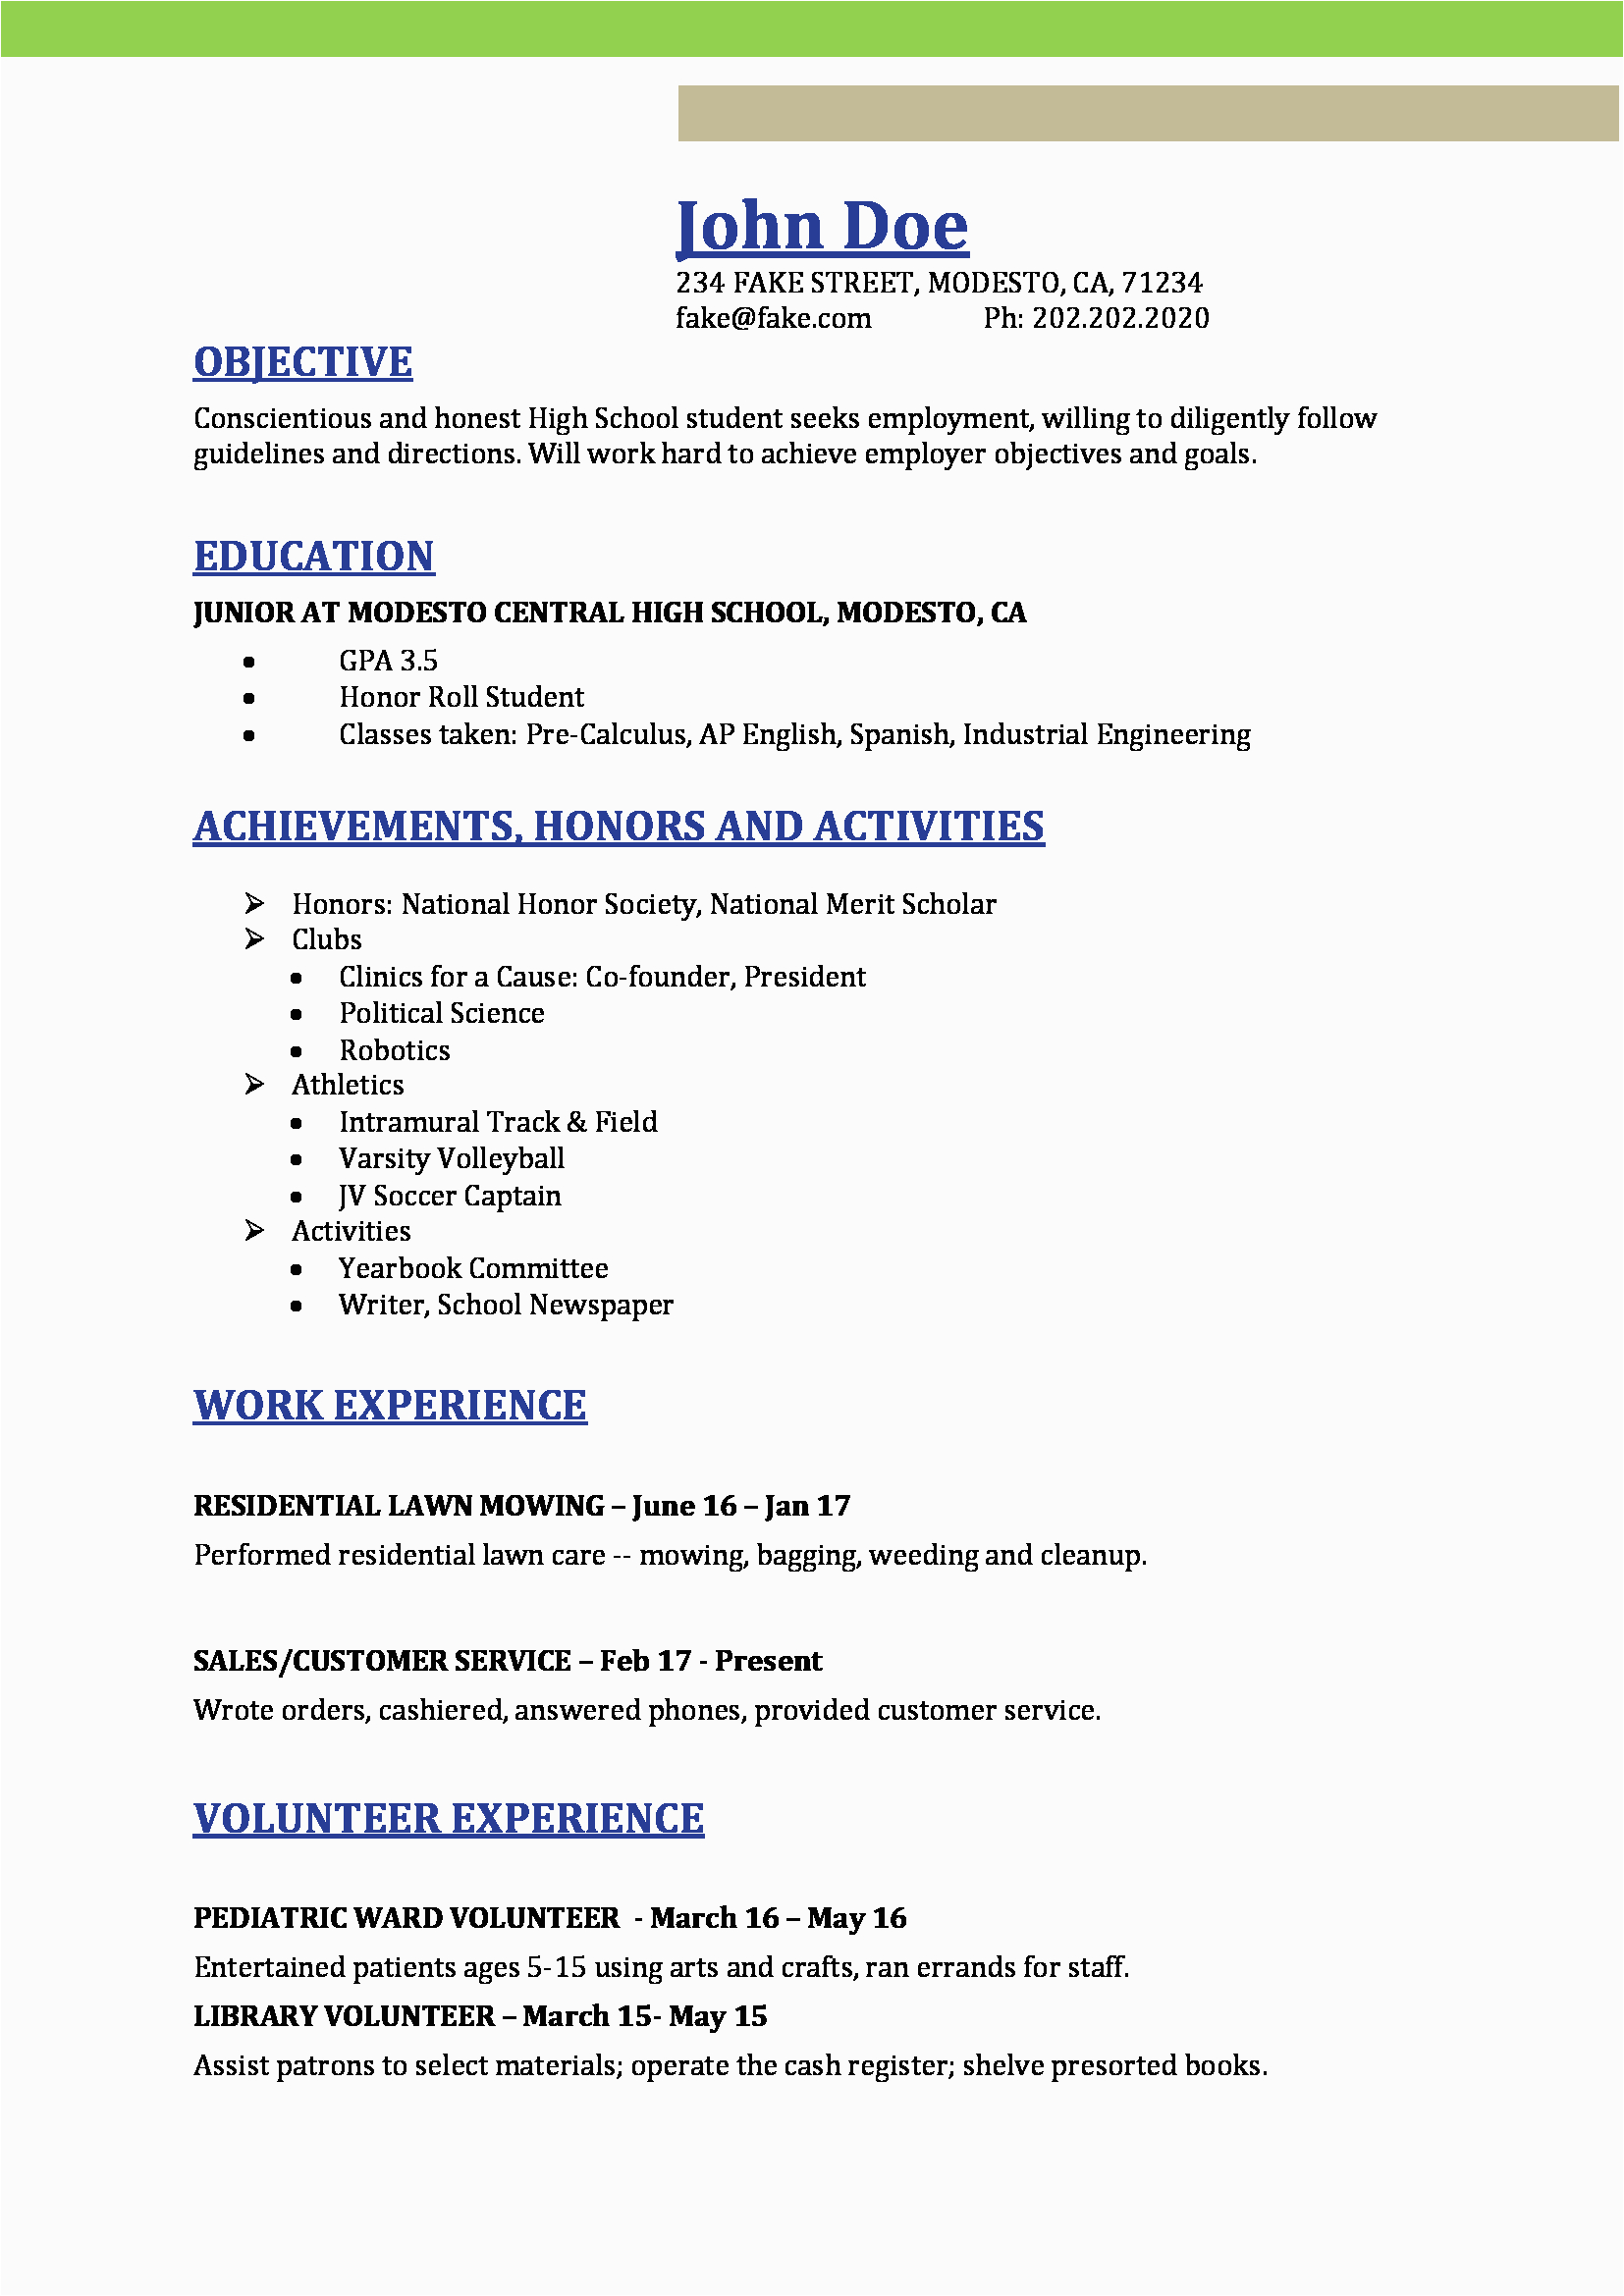 College Resume Template for Highschool Students High School Resume Resume Templates for High School